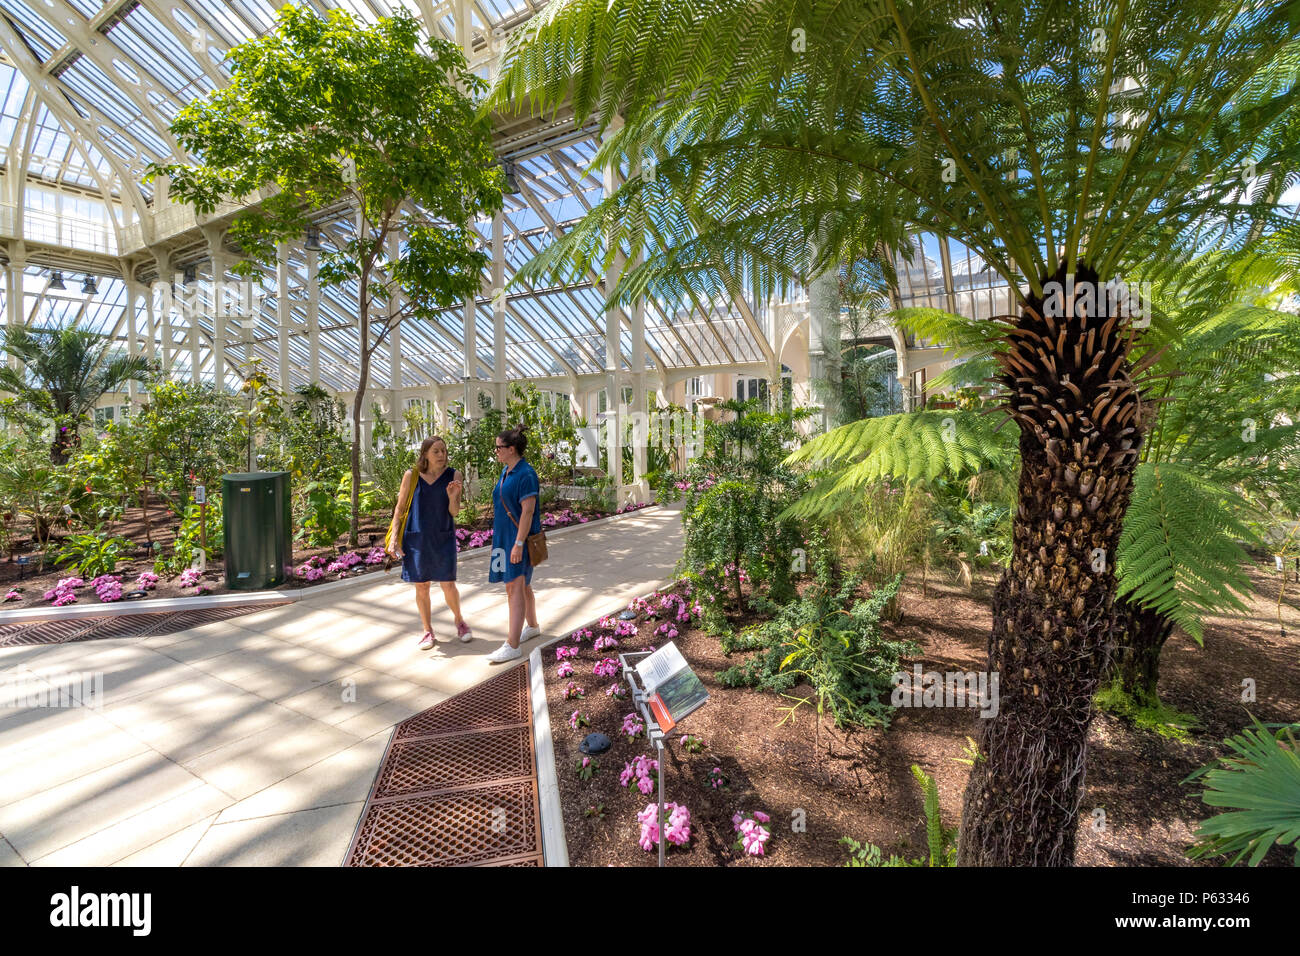 Two people at The Temperate House at Kew Gardens with a Dicksonia Antartica or Australian Tree Fern in the foreground , Kew Gardens London, UK Stock Photo